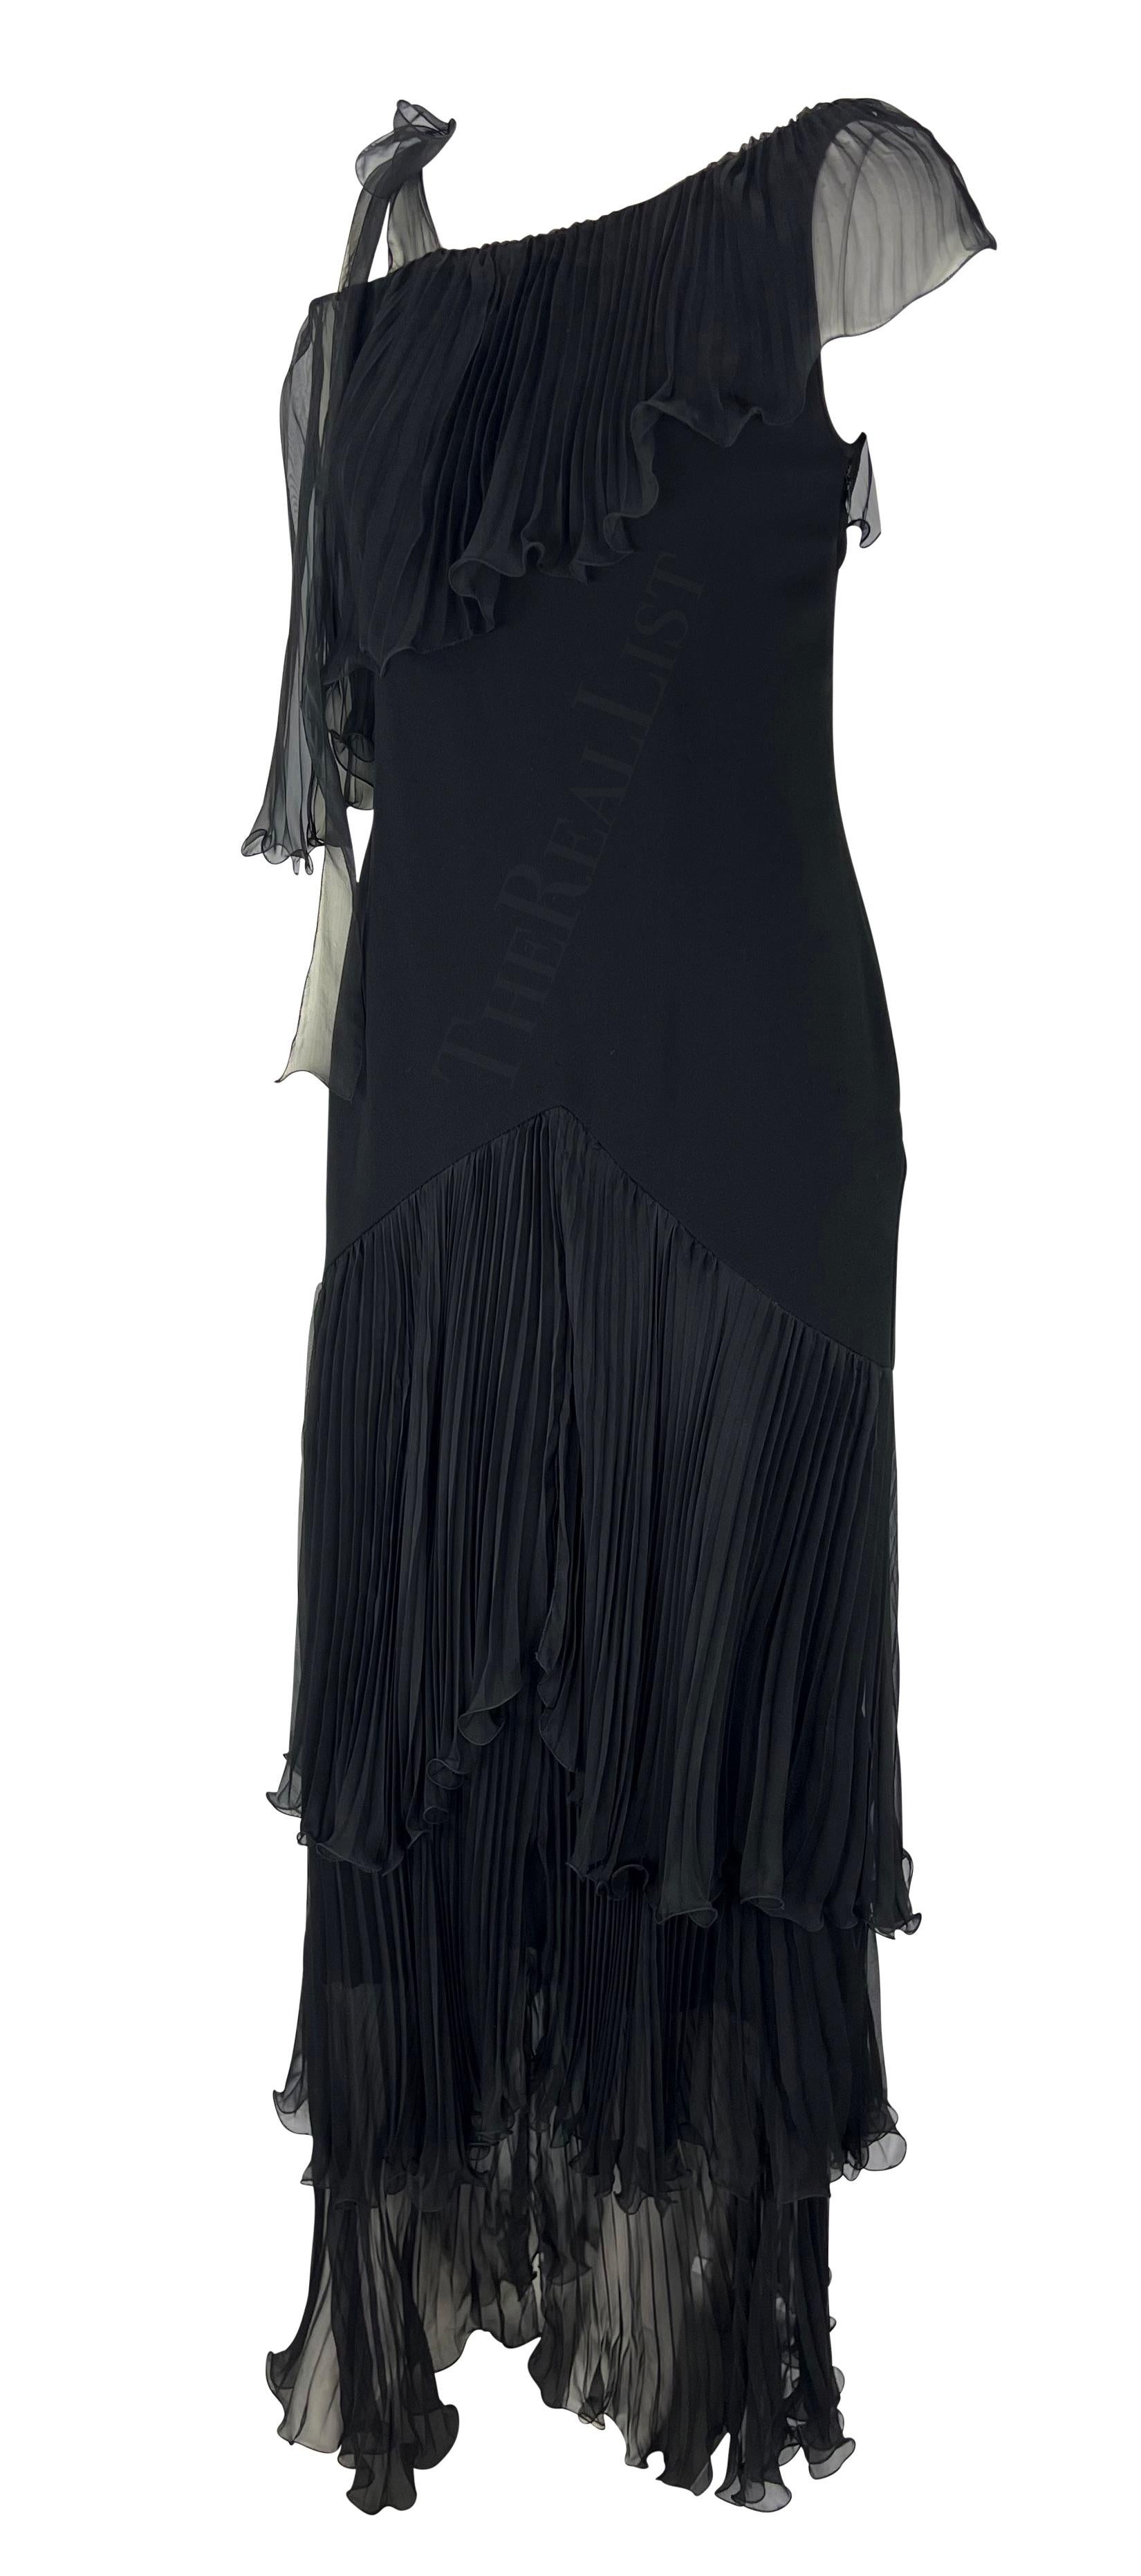 Presenting a black chiffon Emanuel Ungaro gown. Transport yourself to the glamour of the early 2000s with this exquisite floor-length dress. Its cascading tiers create a captivating movement that effortlessly commands attention. The alluring